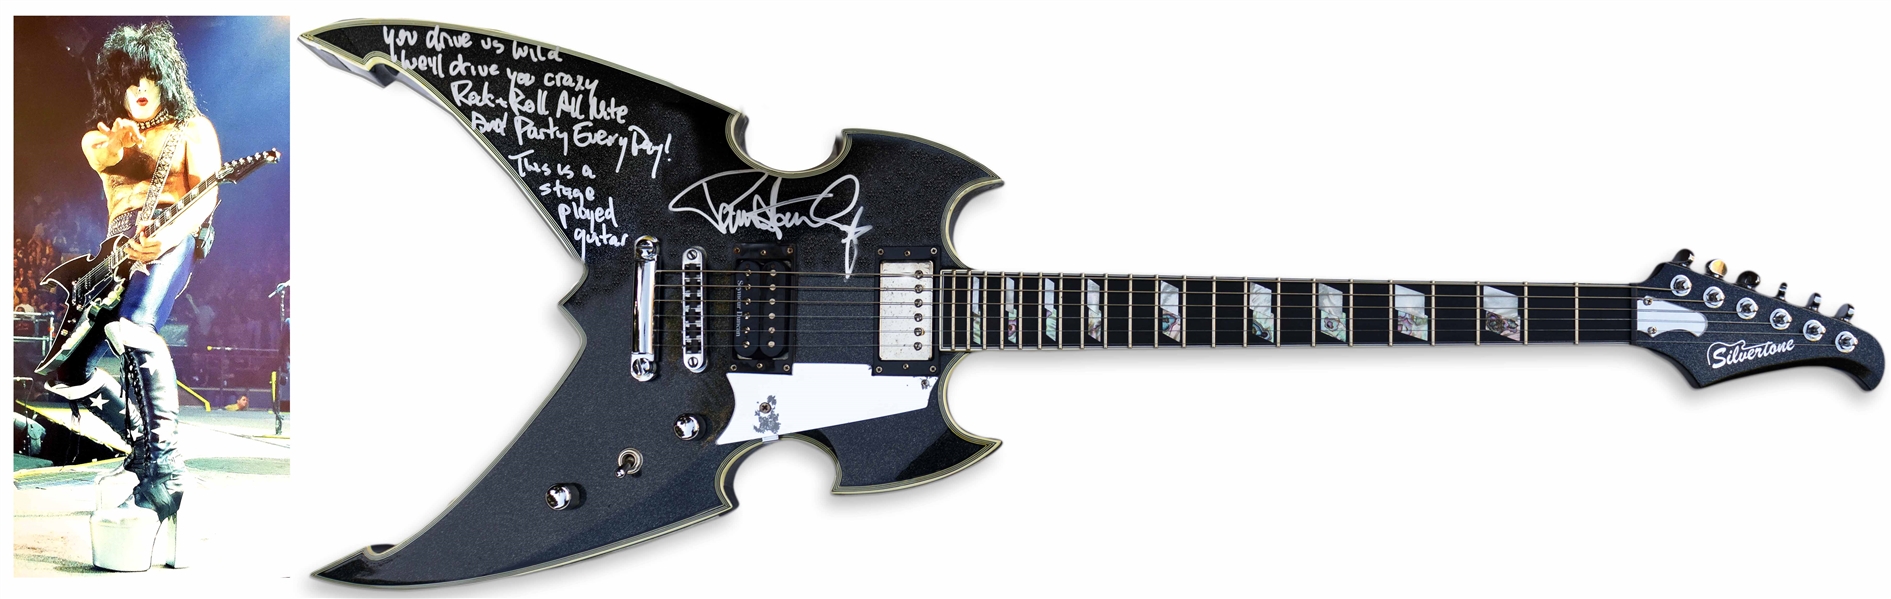 Paul Stanley Signed Guitar Stage-Played With KISS -- ''You Drive Us Wild / We'll Drive You Crazy...Paul Stanley''